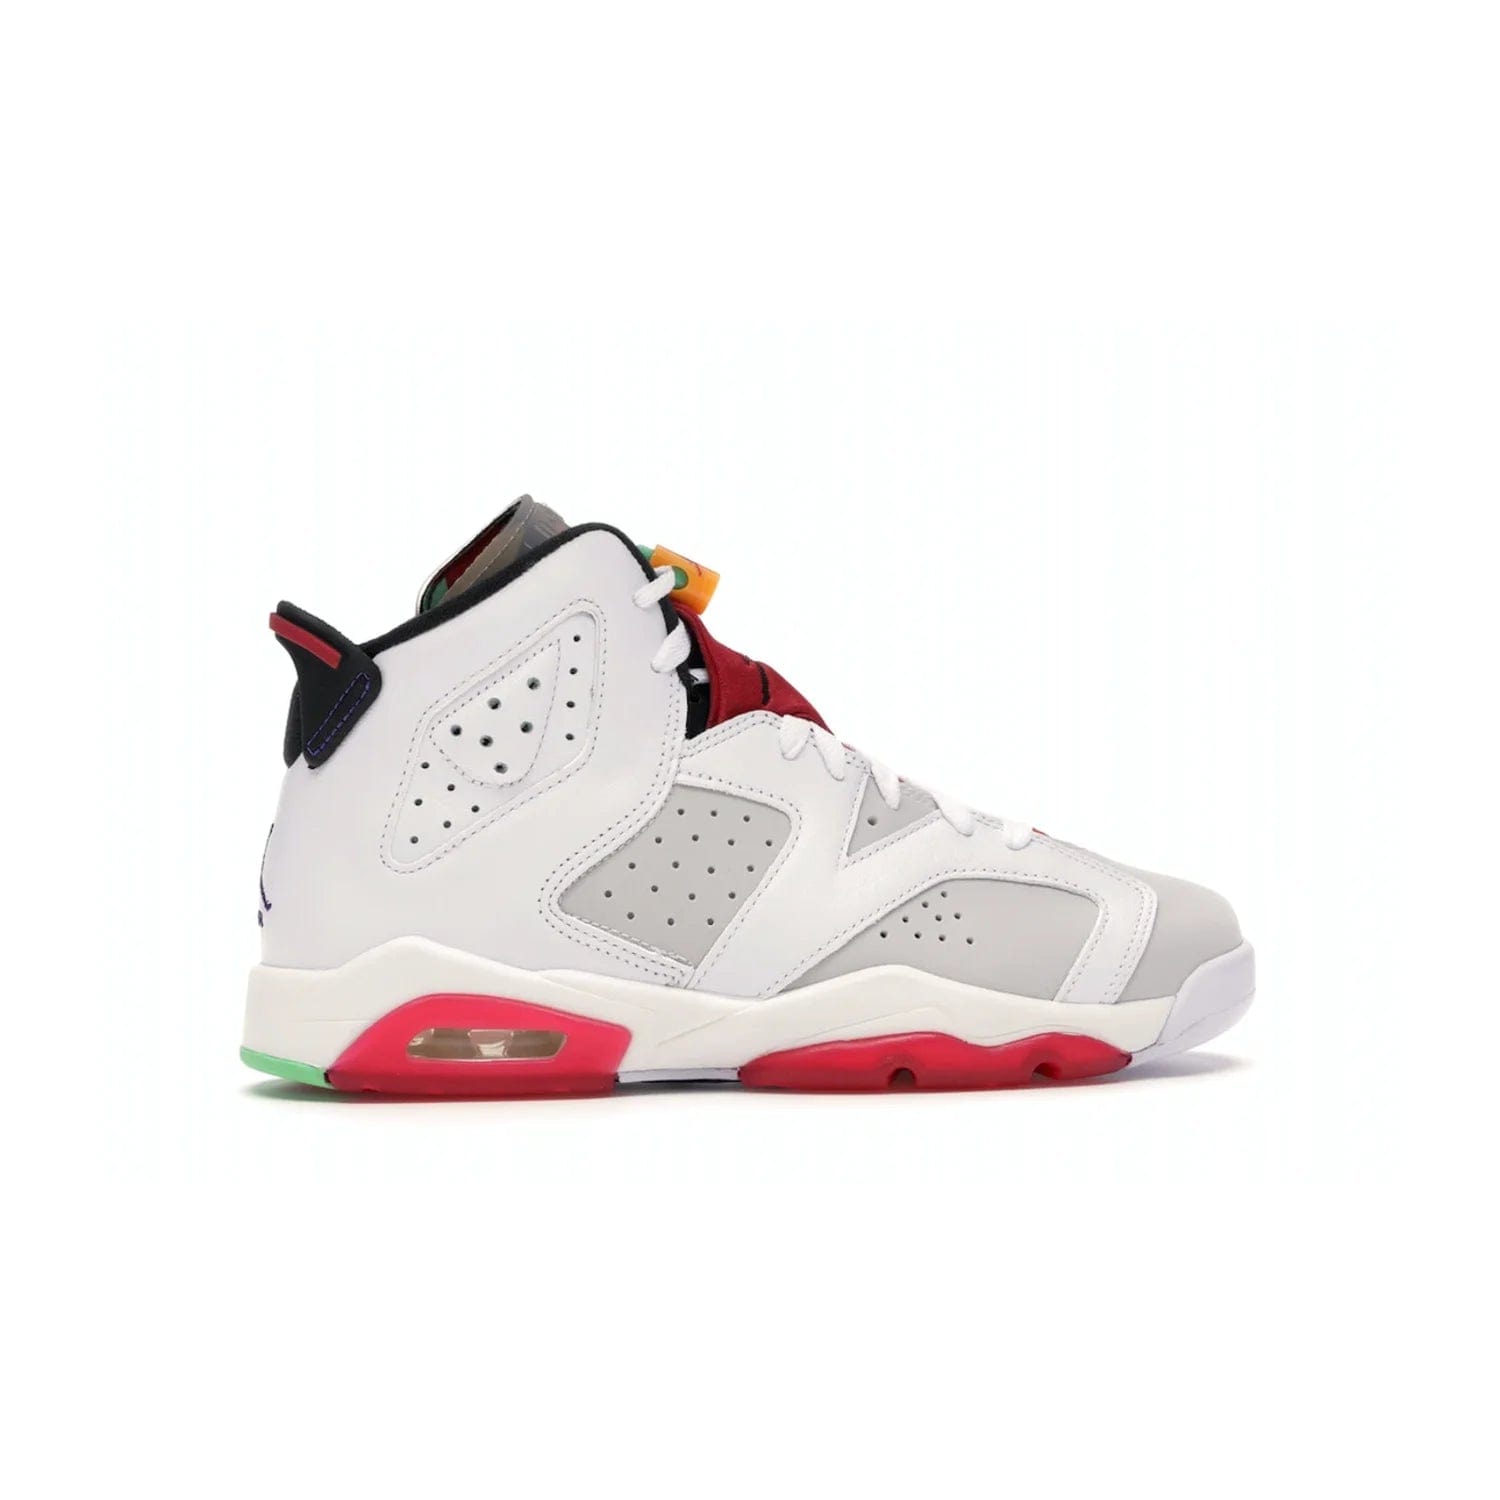 Jordan 6 Retro Hare (GS) - Image 36 - Only at www.BallersClubKickz.com - The Air Jordan 6 Hare GS. Comfortable suede upper, perforations, red pods, two-tone midsole, and signature "Jumpman" emblem. Released 17 June 2020. Perfect for any sneakerhead.